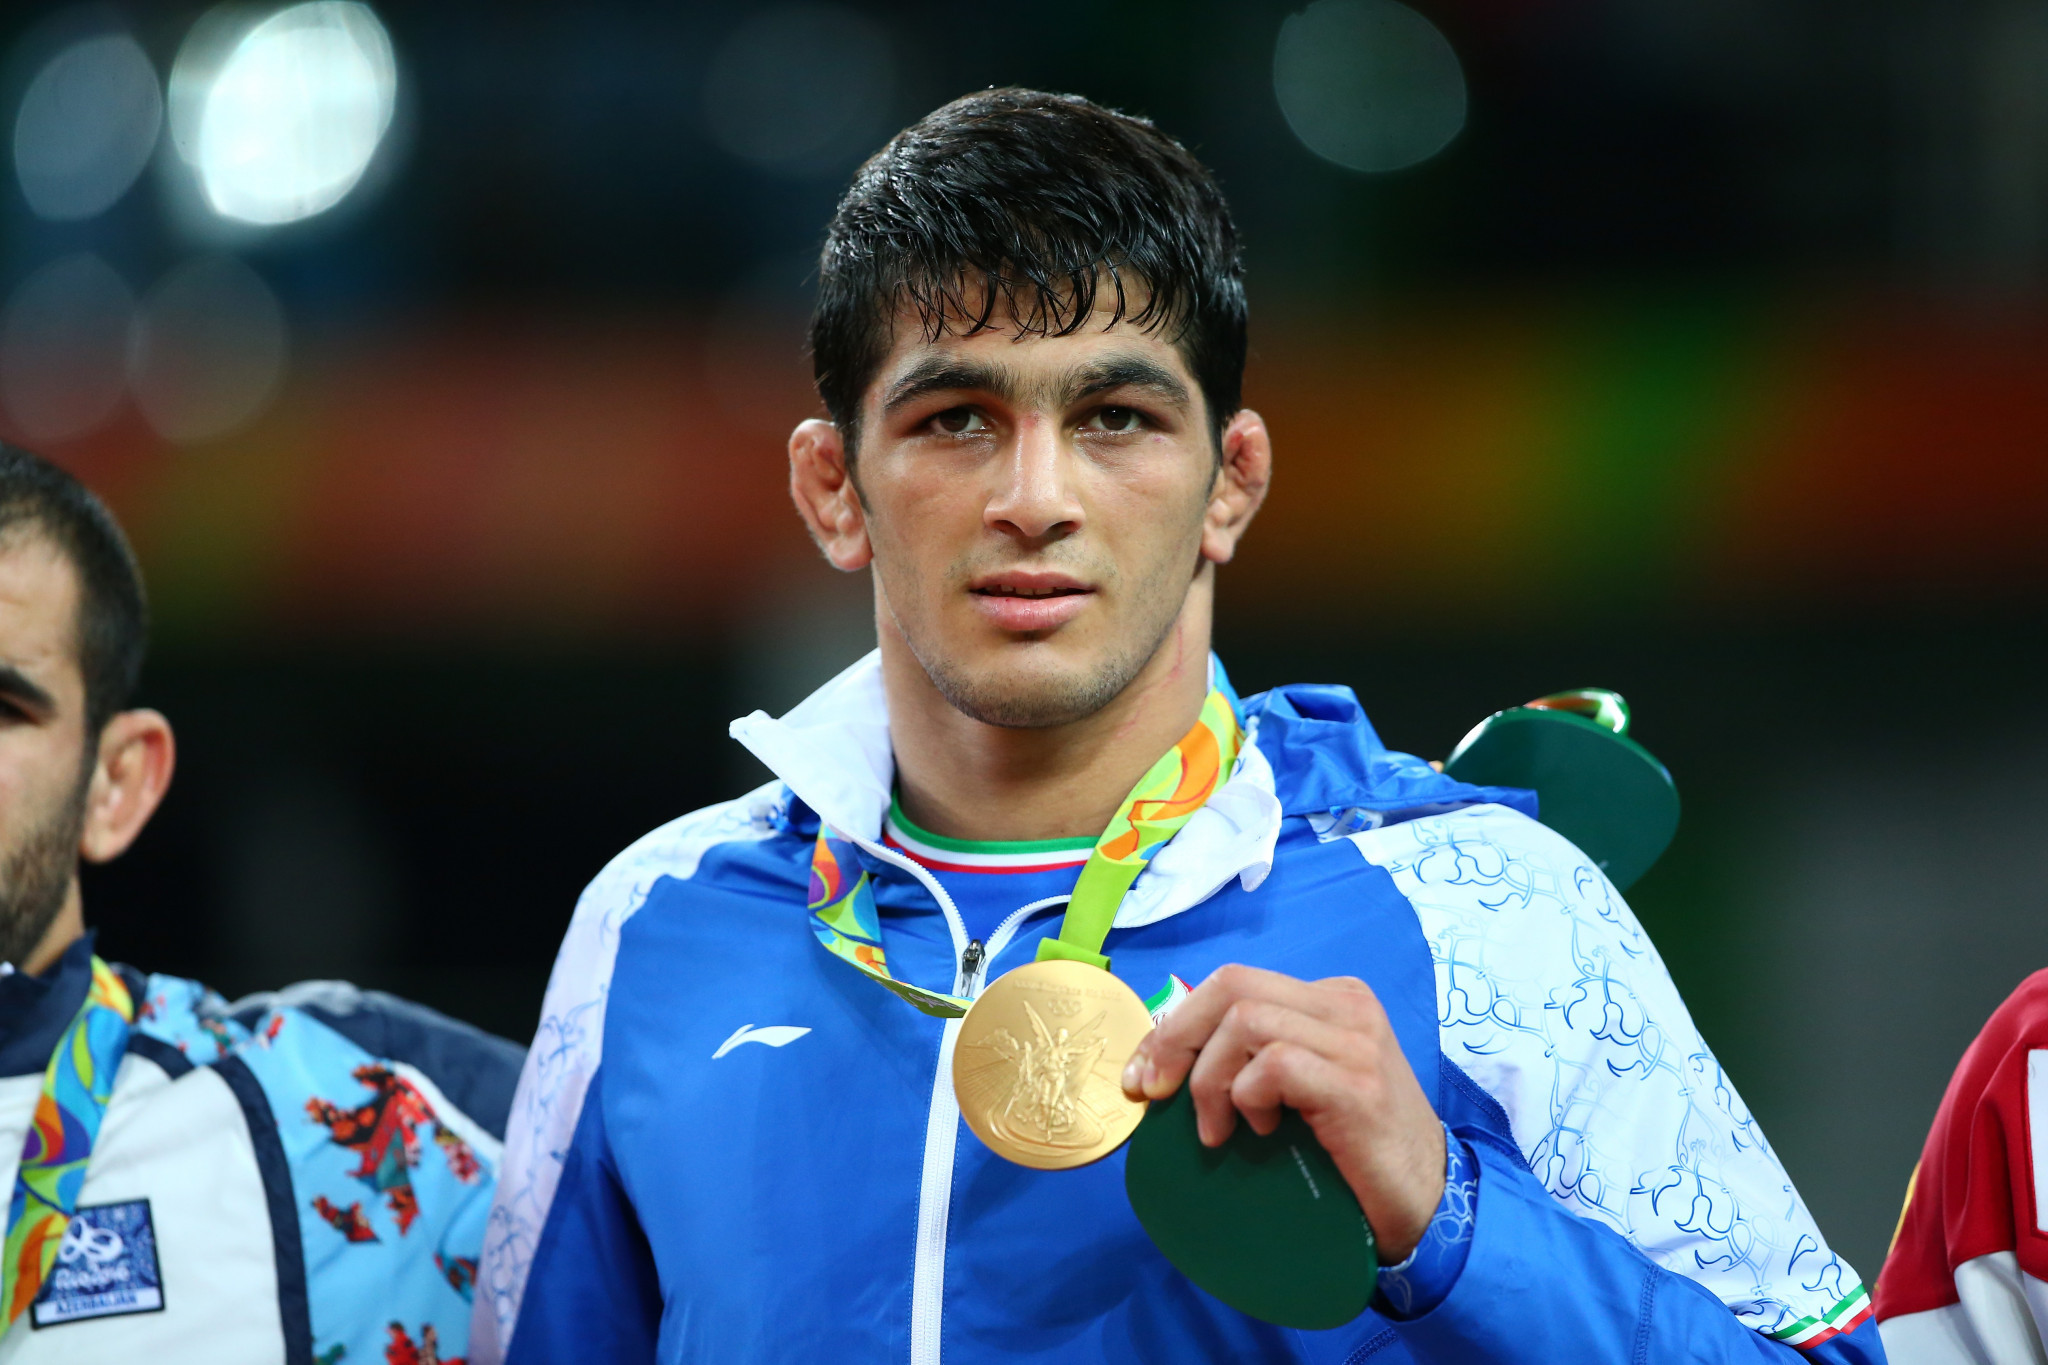 Olympic wrestling champion Yazdani aiming to compete at Paris 2024